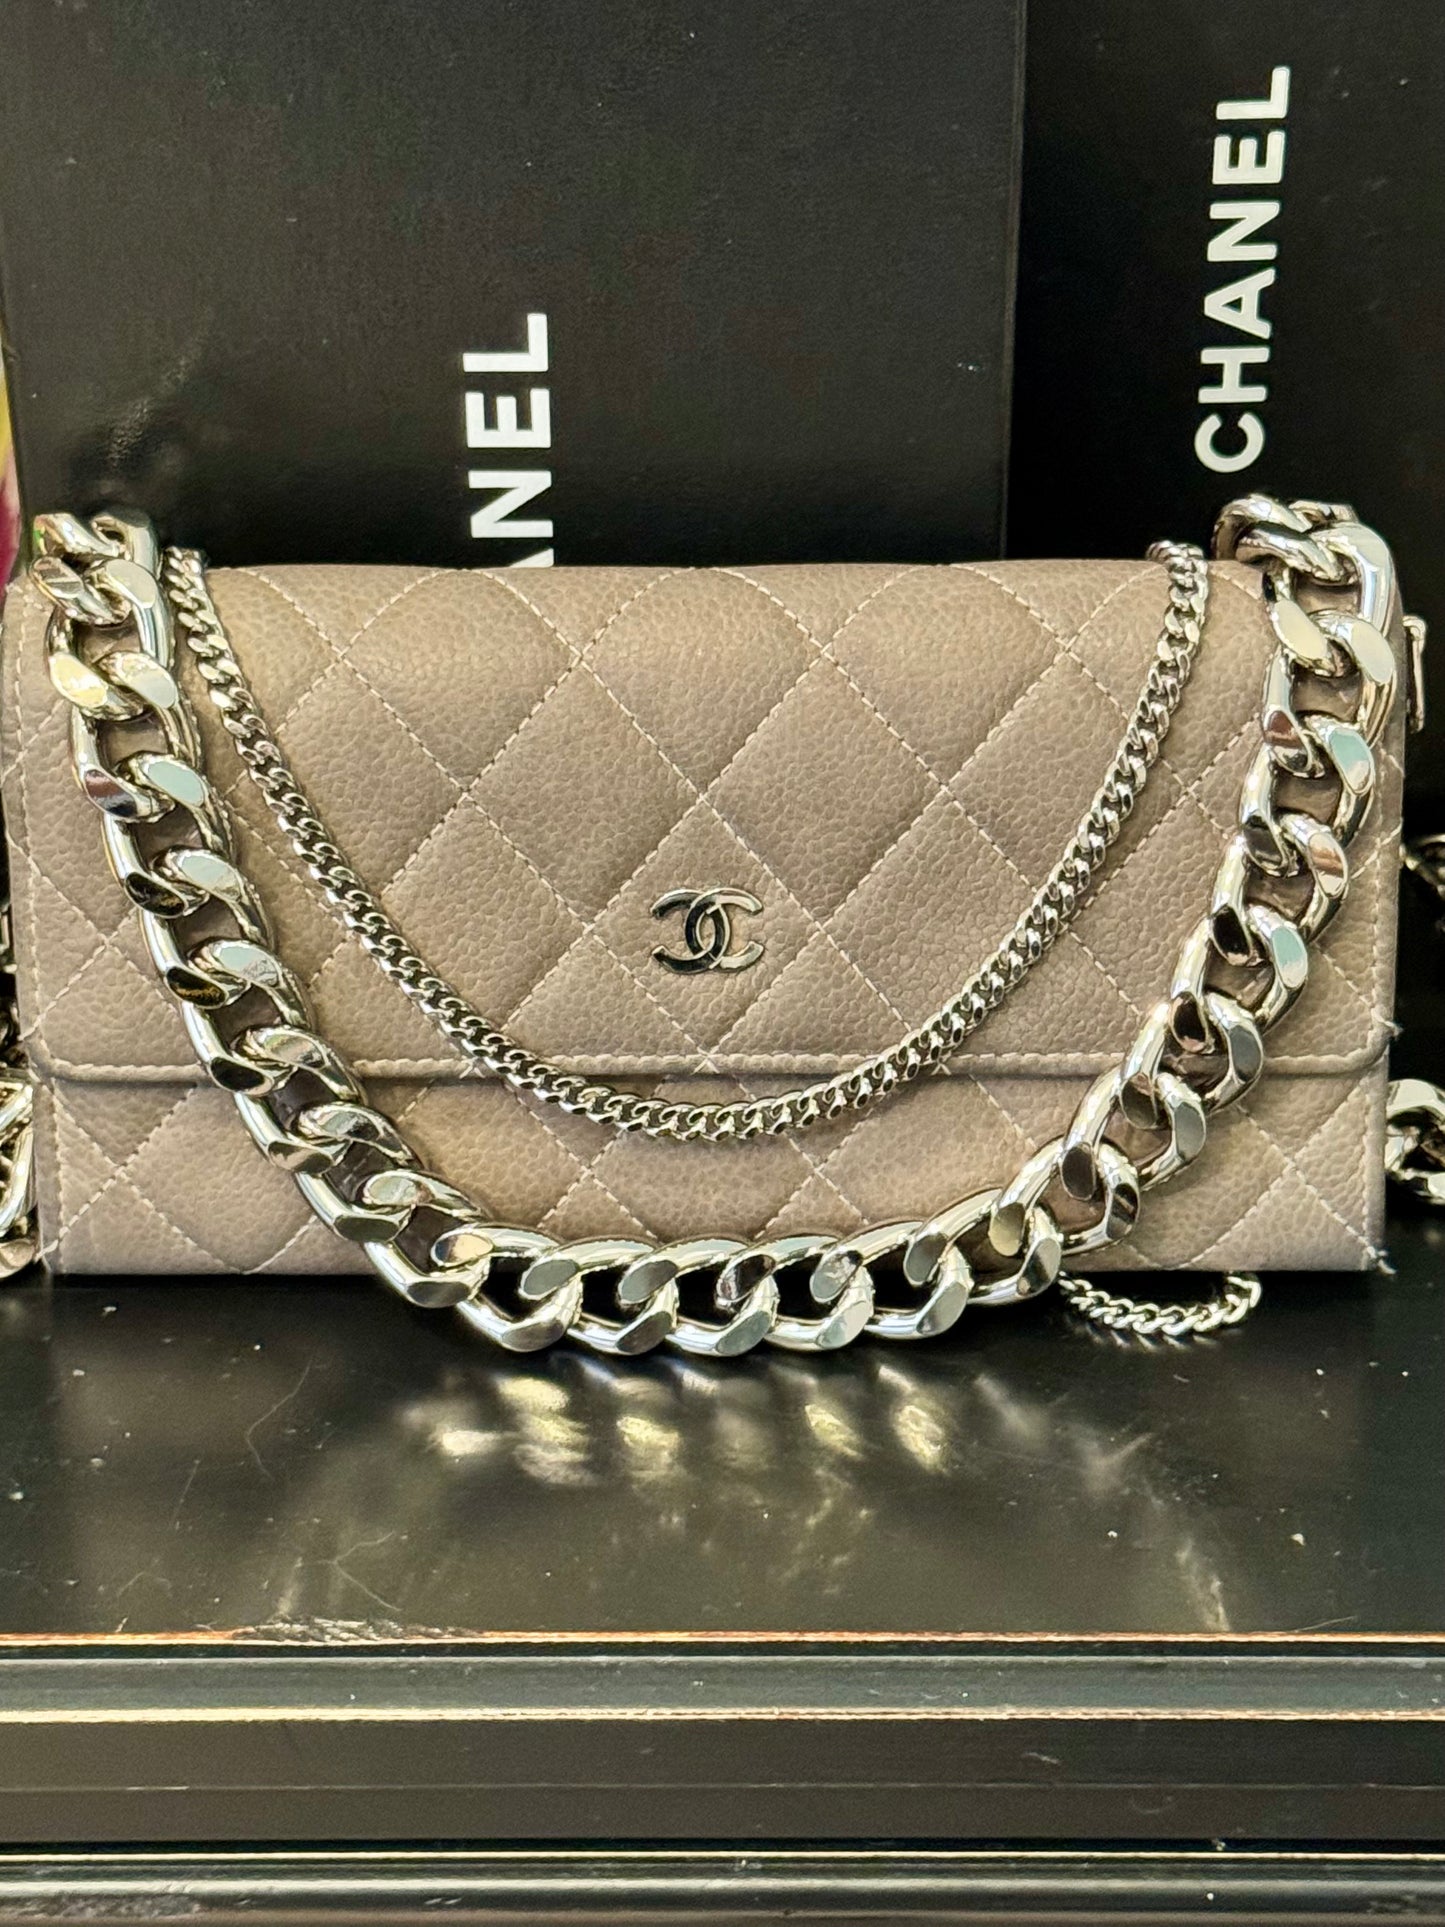 Vintage Chanel Taupe Caviar Skin Long Wallet Clutch/ WOC 2 Chain straps